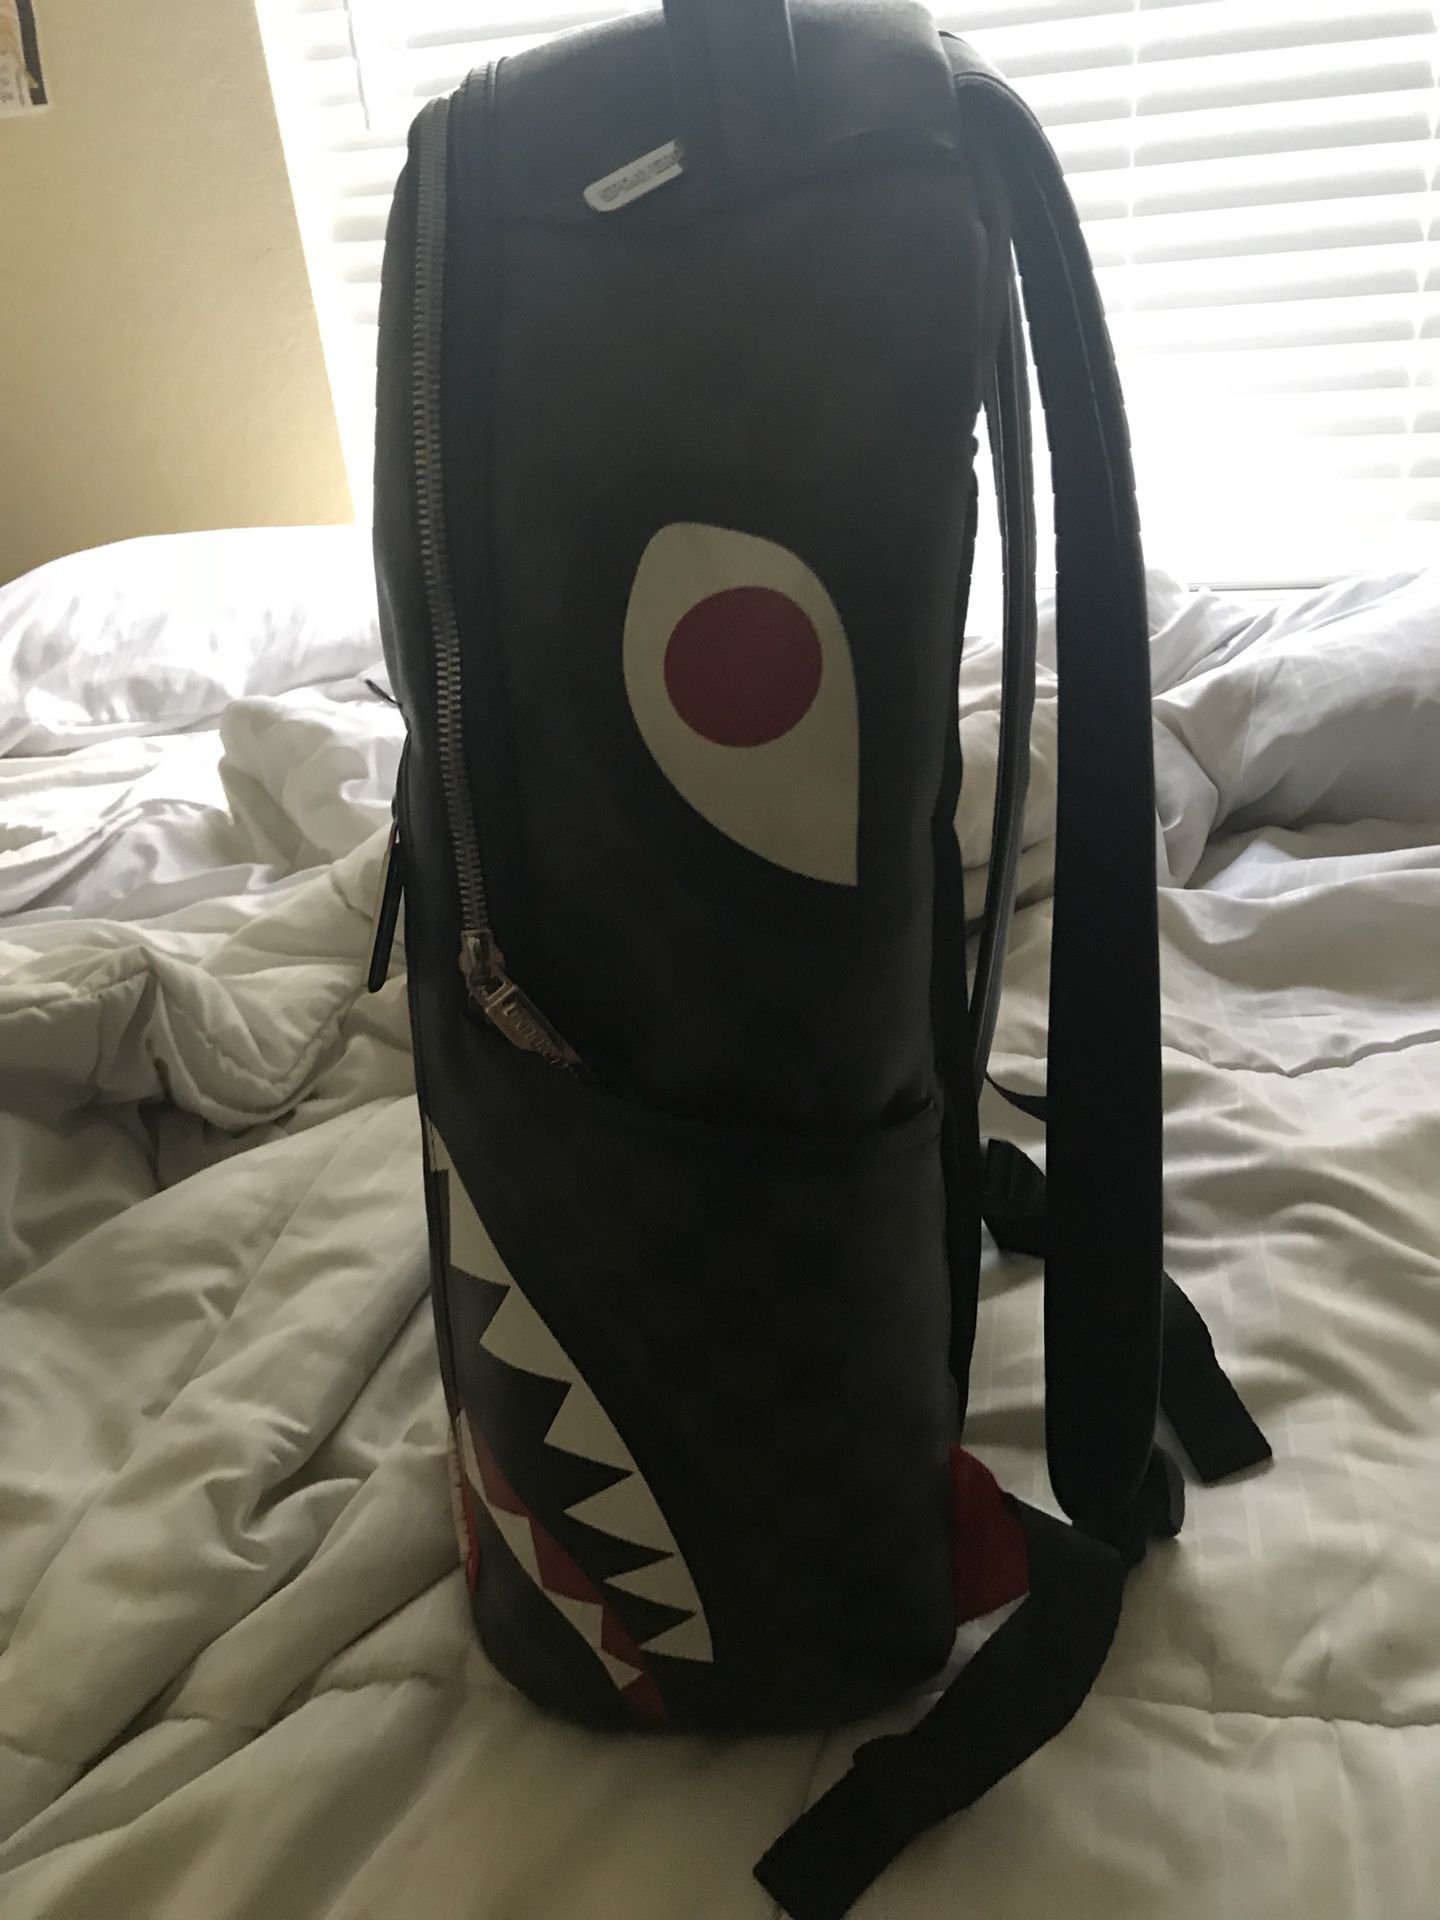 SPRAYGROUND BACKPACK SHARKS PARIS DEADSTOCK AUTHENTIC for Sale in Los  Angeles, CA - OfferUp